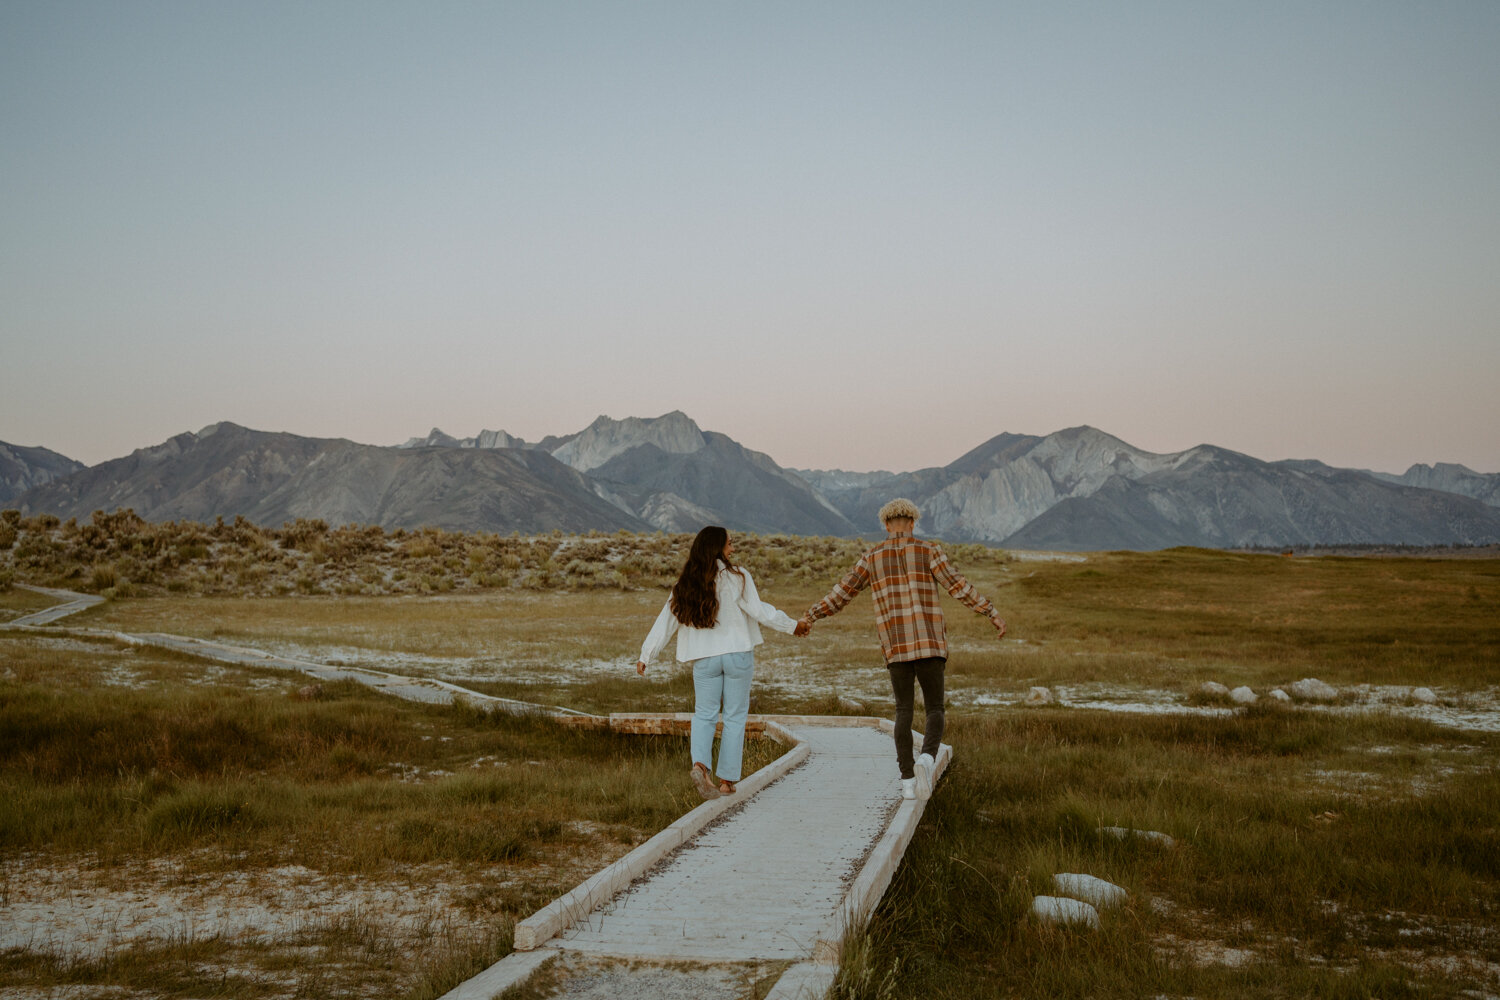 Hot Springs Engagement Session | Couples Photos at Mammoth Lakes, California | Sunrise at Wild Willy’s Hot Springs | Couple outfit inspo